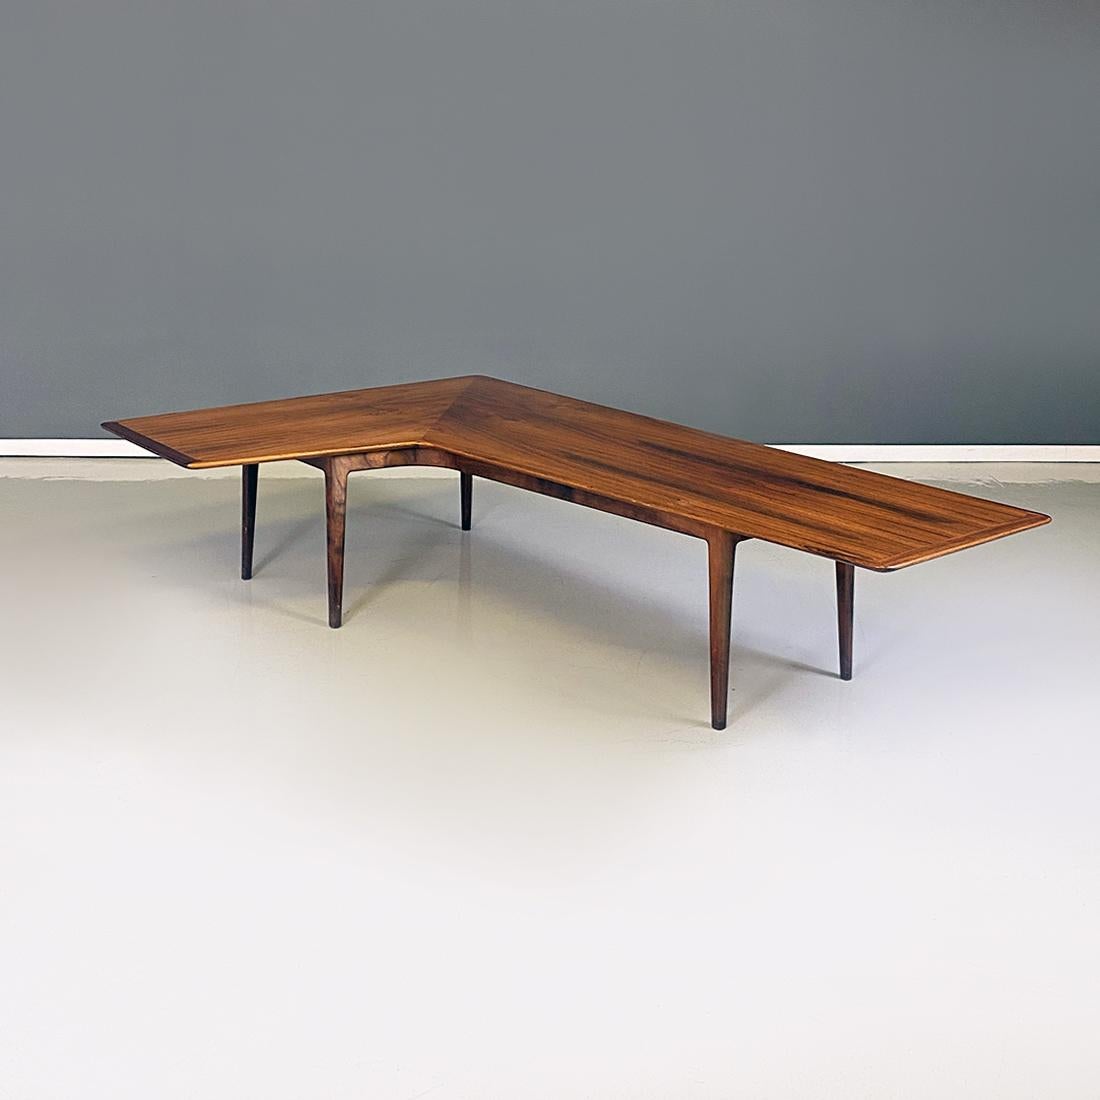 Italian Mid-Century Modern Solid Wood Coffee Table with a Boomerang Shape, 1960s 4